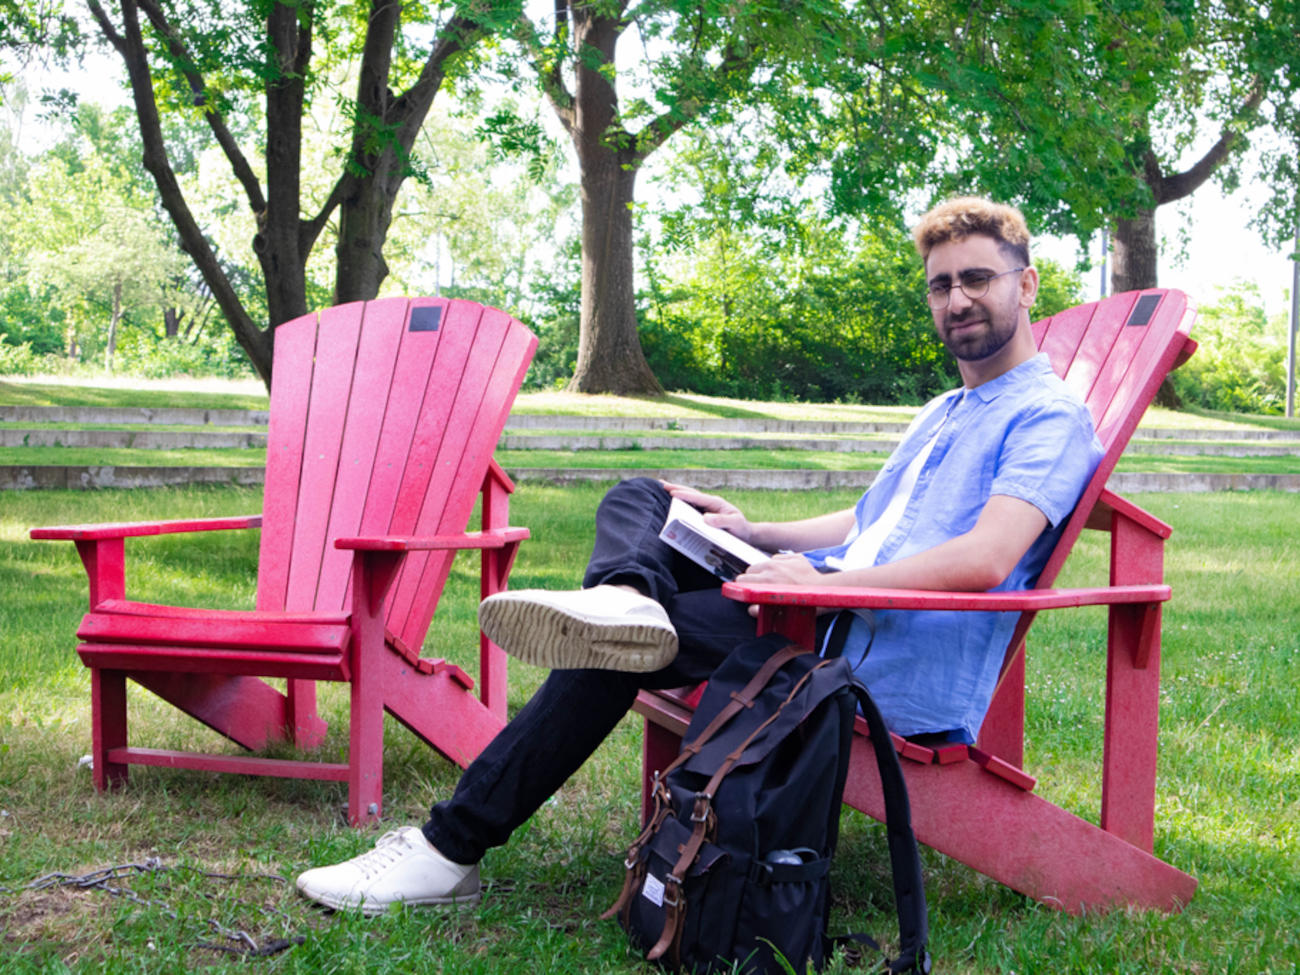 Zakir sits on one of the red Dickinson chairs on the university lawn.